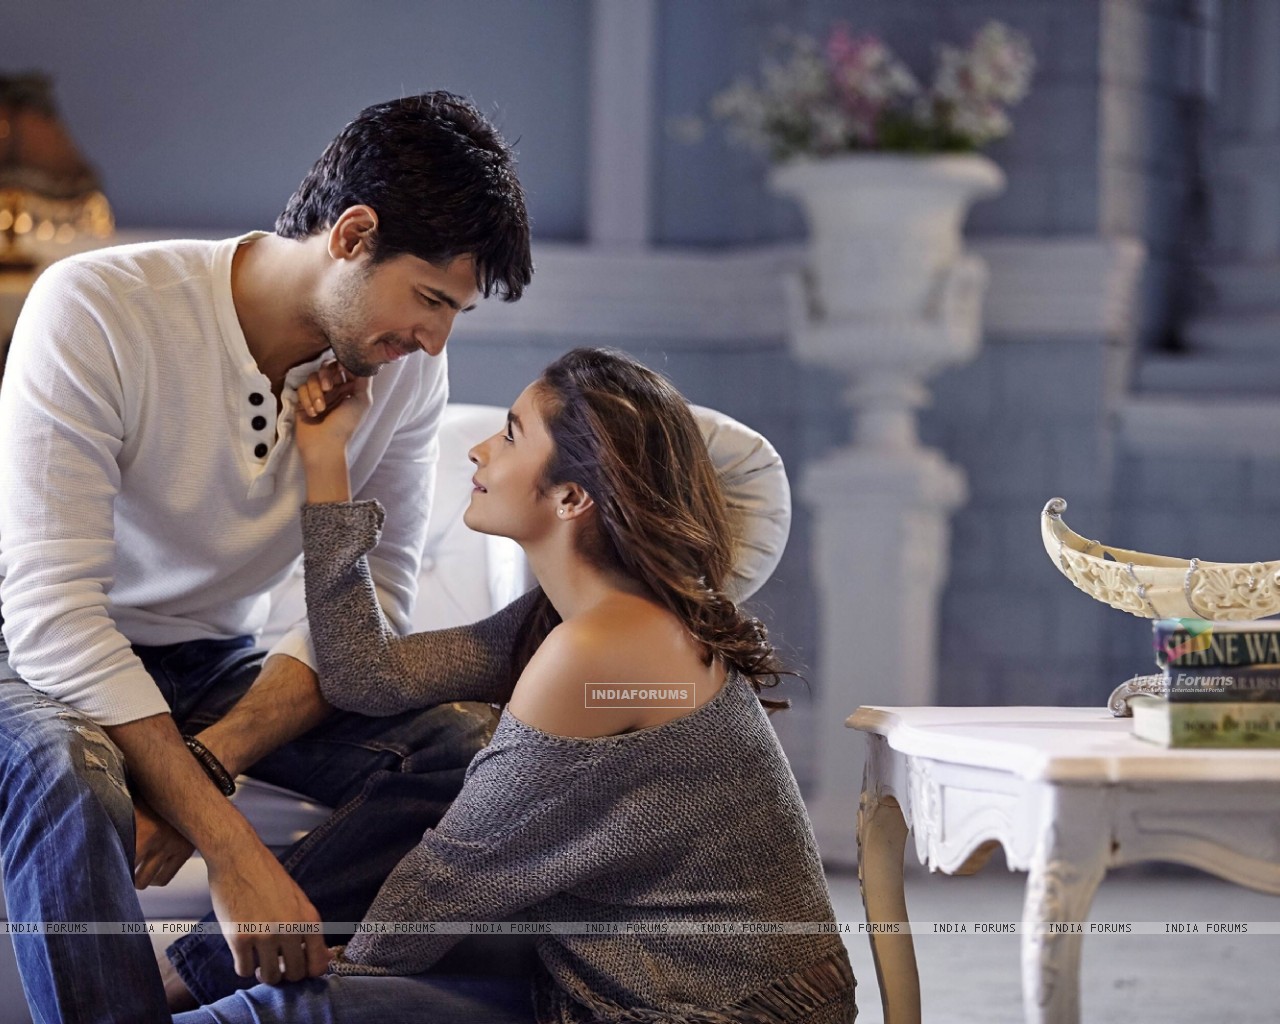 Kapoor And Sons mp3 songs free, download